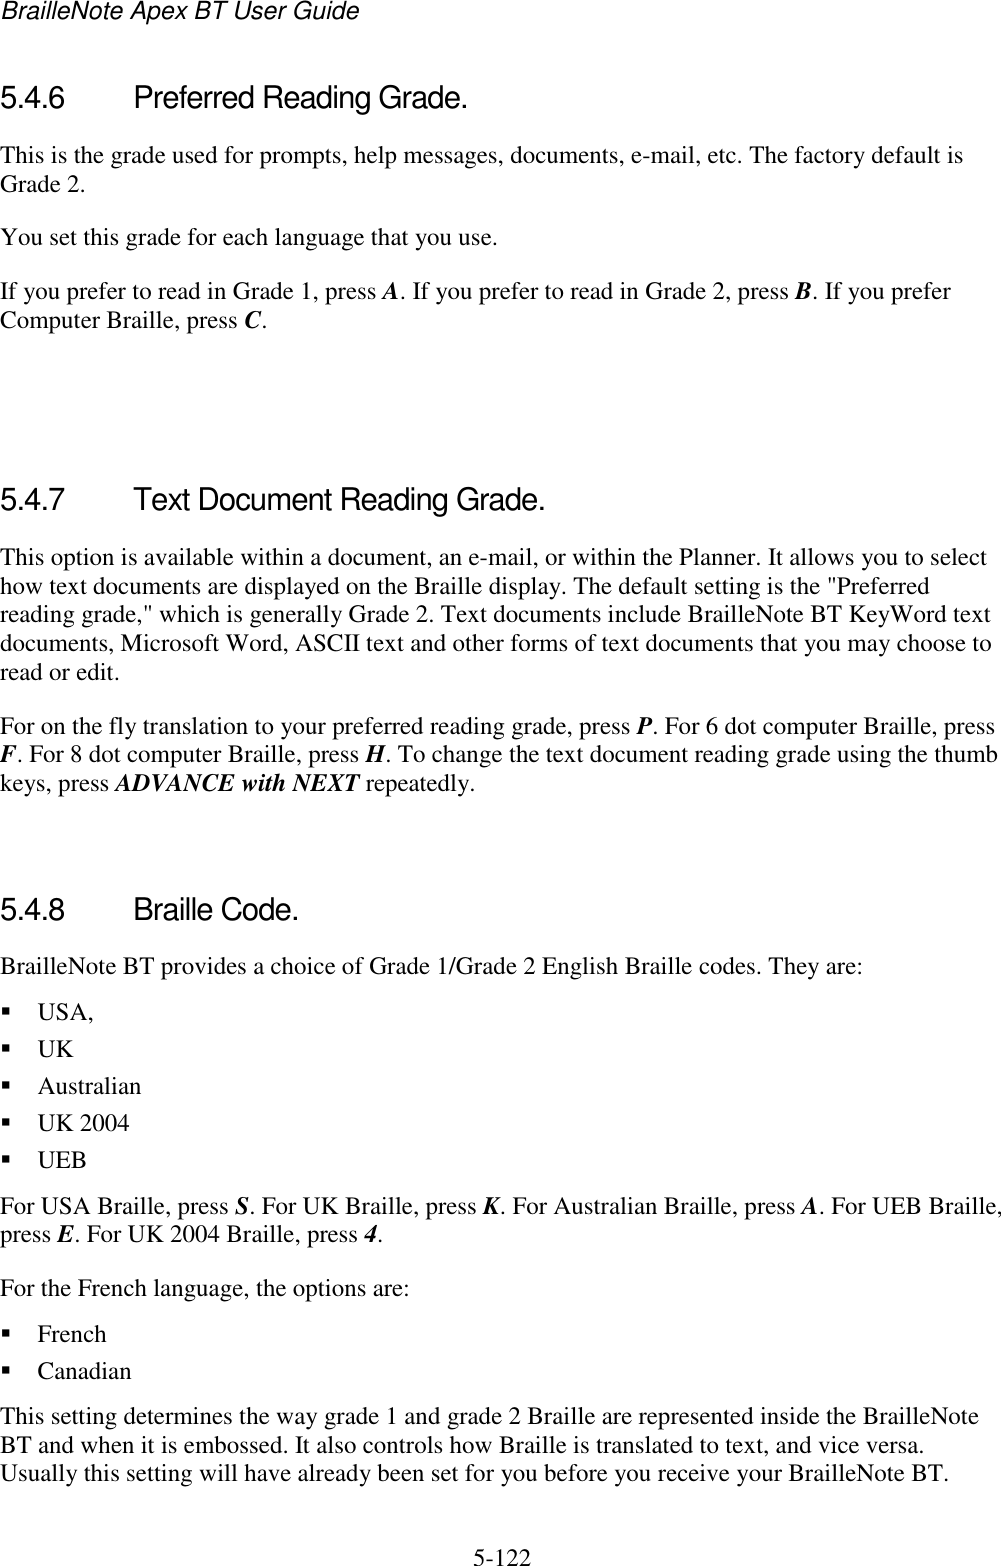 BrailleNote Apex BT User Guide   5-122   5.4.6  Preferred Reading Grade. This is the grade used for prompts, help messages, documents, e-mail, etc. The factory default is Grade 2.  You set this grade for each language that you use. If you prefer to read in Grade 1, press A. If you prefer to read in Grade 2, press B. If you prefer Computer Braille, press C.    5.4.7  Text Document Reading Grade. This option is available within a document, an e-mail, or within the Planner. It allows you to select how text documents are displayed on the Braille display. The default setting is the &quot;Preferred reading grade,&quot; which is generally Grade 2. Text documents include BrailleNote BT KeyWord text documents, Microsoft Word, ASCII text and other forms of text documents that you may choose to read or edit. For on the fly translation to your preferred reading grade, press P. For 6 dot computer Braille, press F. For 8 dot computer Braille, press H. To change the text document reading grade using the thumb keys, press ADVANCE with NEXT repeatedly.   5.4.8  Braille Code. BrailleNote BT provides a choice of Grade 1/Grade 2 English Braille codes. They are:  USA,   UK   Australian  UK 2004  UEB For USA Braille, press S. For UK Braille, press K. For Australian Braille, press A. For UEB Braille, press E. For UK 2004 Braille, press 4. For the French language, the options are:  French  Canadian This setting determines the way grade 1 and grade 2 Braille are represented inside the BrailleNote BT and when it is embossed. It also controls how Braille is translated to text, and vice versa. Usually this setting will have already been set for you before you receive your BrailleNote BT.   